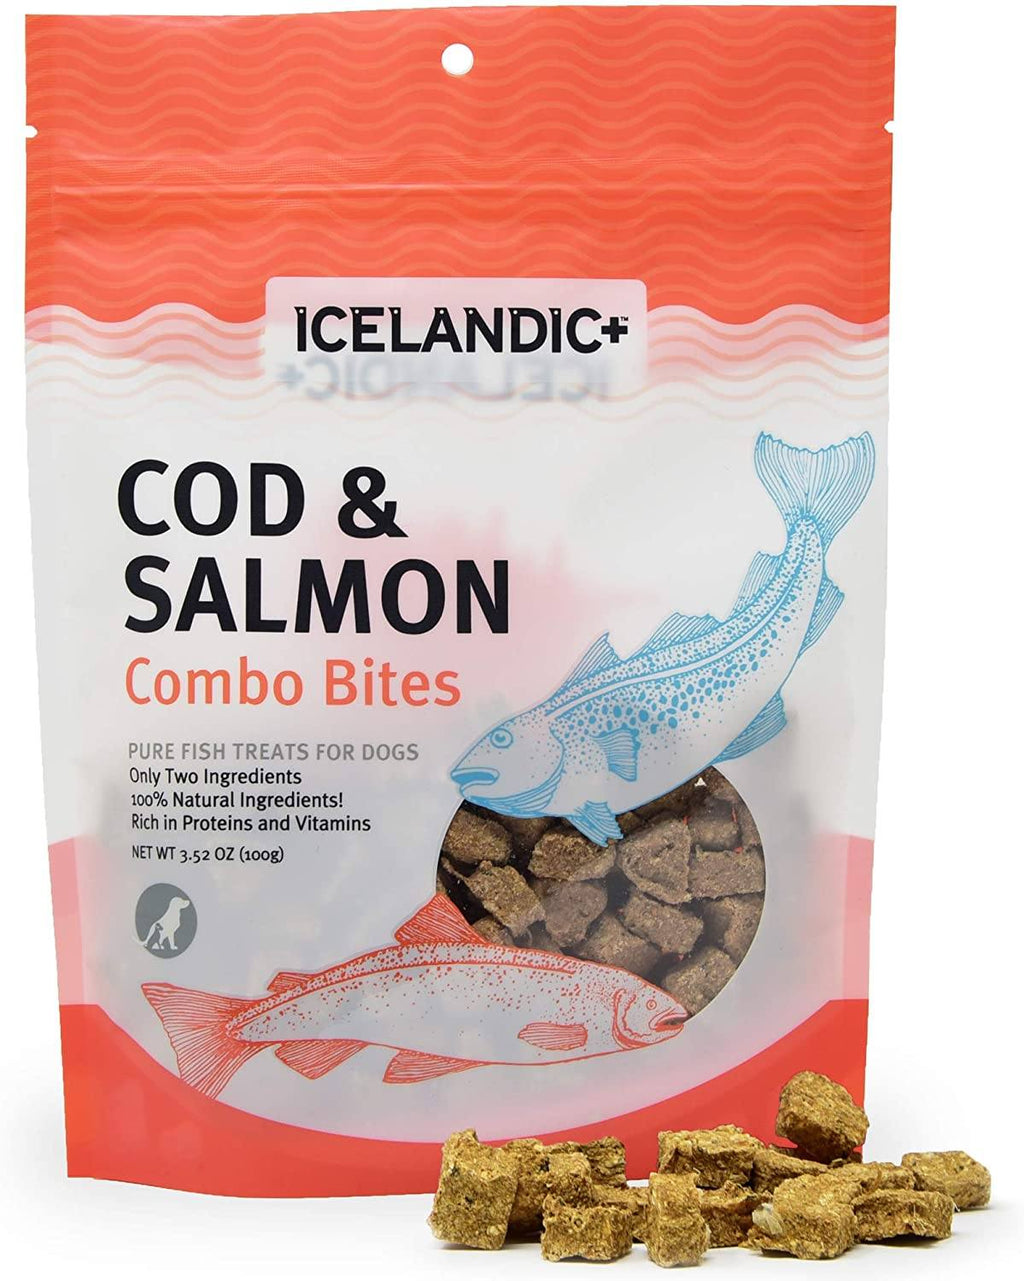 Icelandic+ Cod & Salmon Combo Bites Natural Chewy Cat and Dog Treats - 3.52 oz  